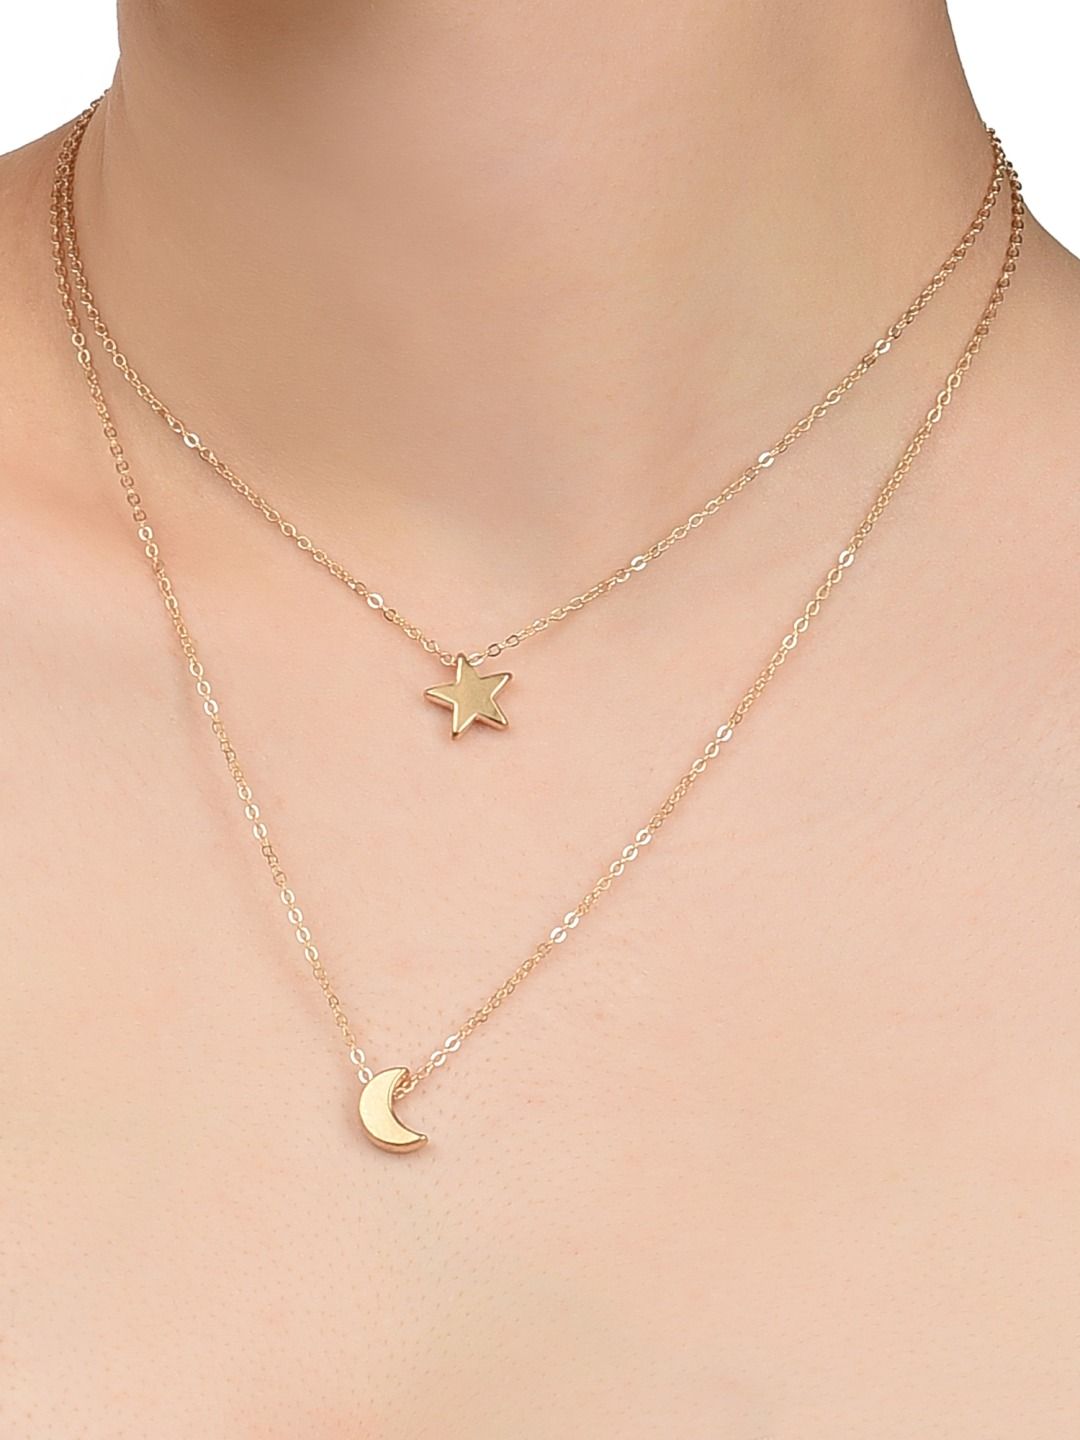 Zaveri Pearls Rose Gold-Plated Moon & Star Shaped Layered Necklace Price in India